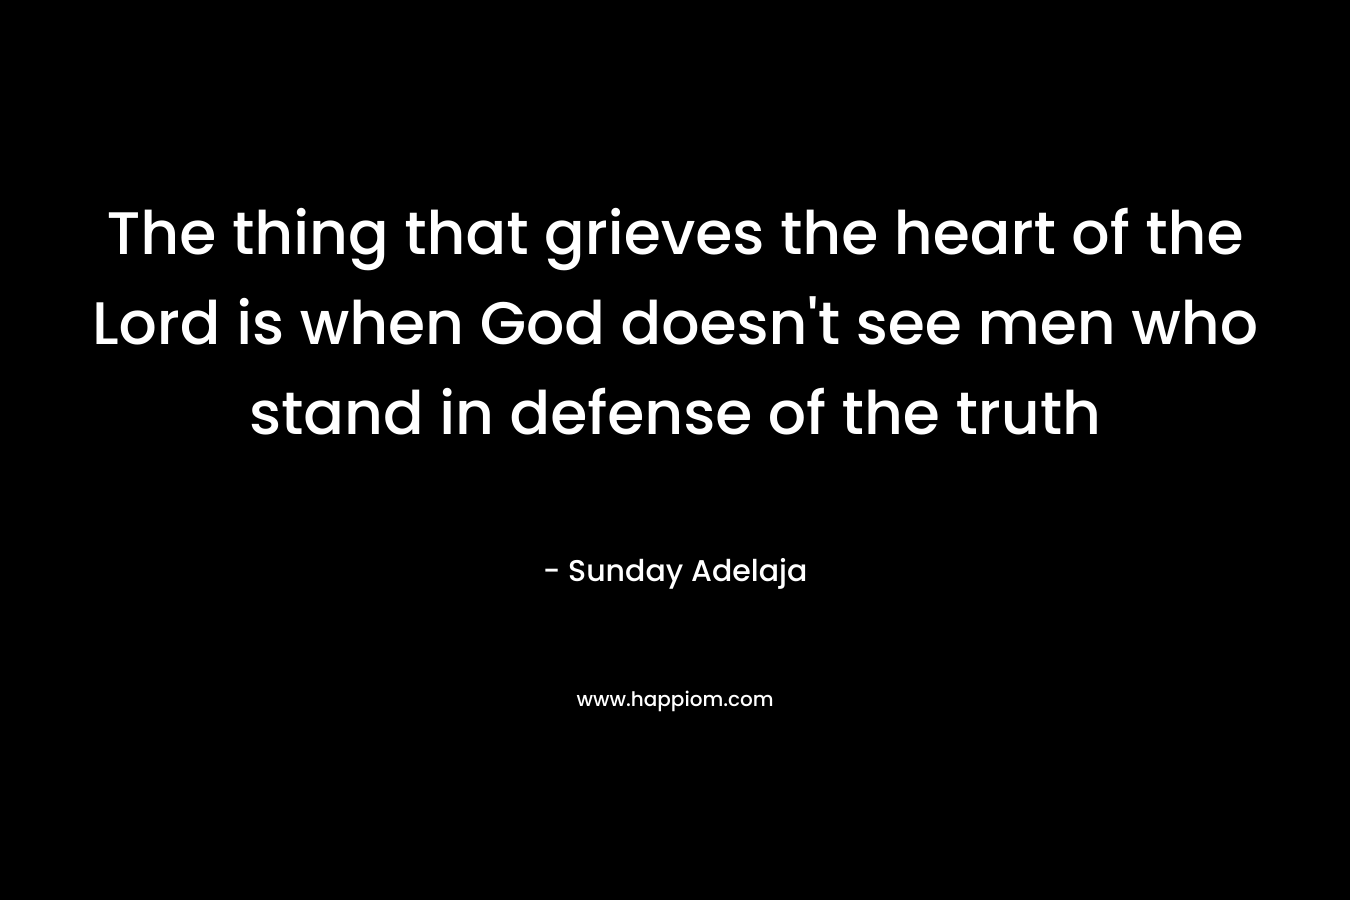 The thing that grieves the heart of the Lord is when God doesn't see men who stand in defense of the truth